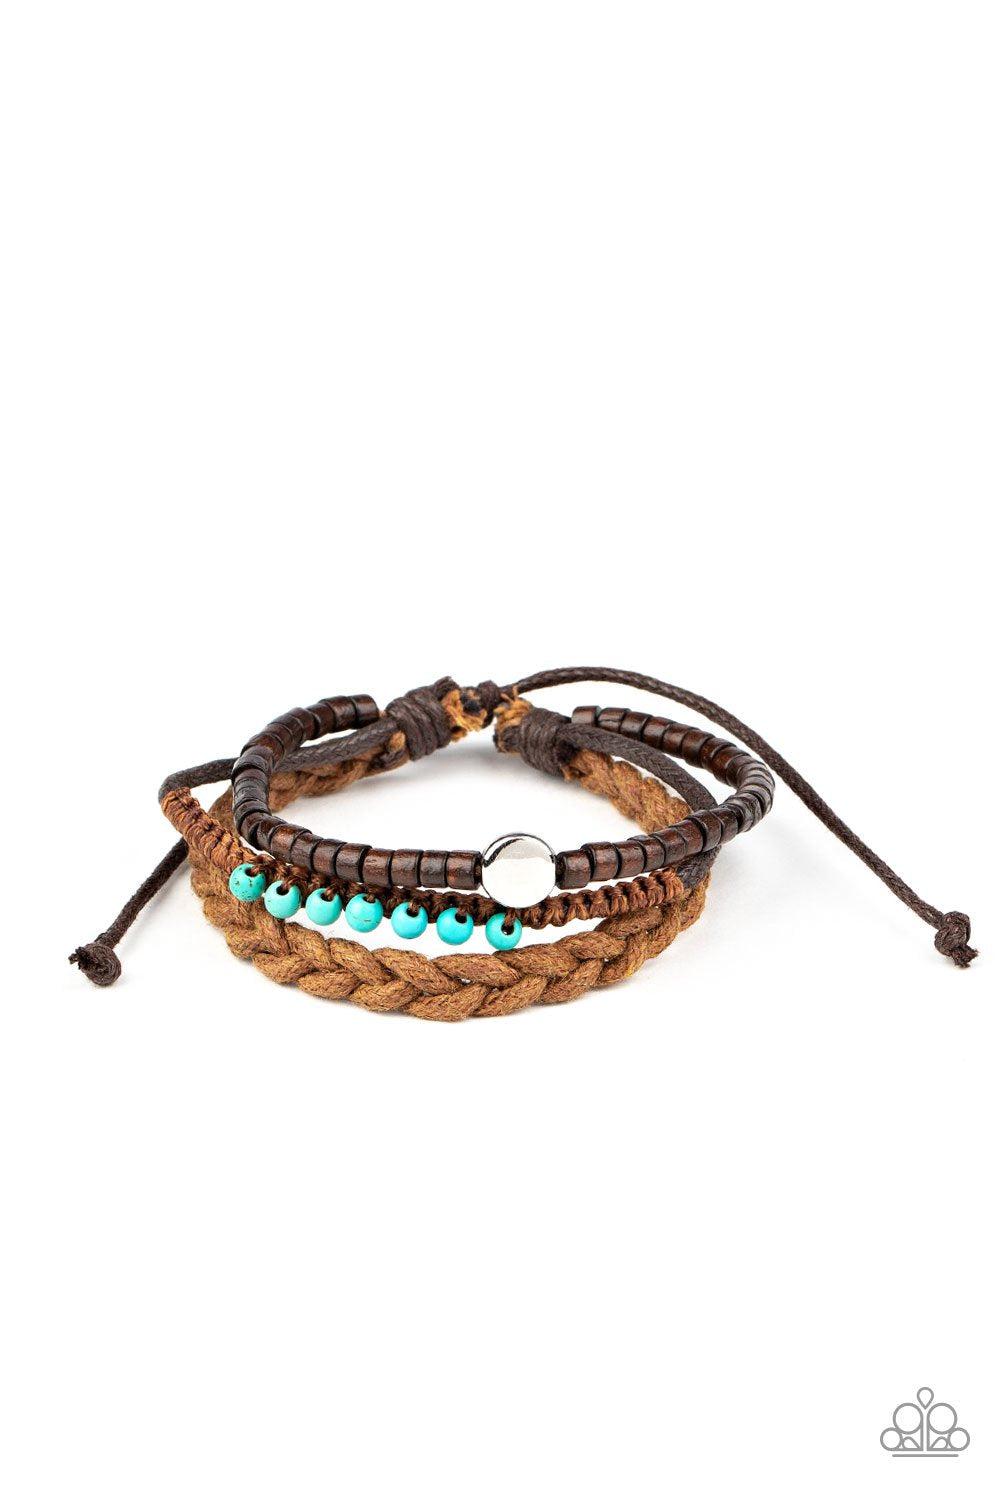 Beach Adventure Turquoise Blue Stone and Wood Bead Urban Knot Bracelet - Paparazzi Accessories-CarasShop.com - $5 Jewelry by Cara Jewels